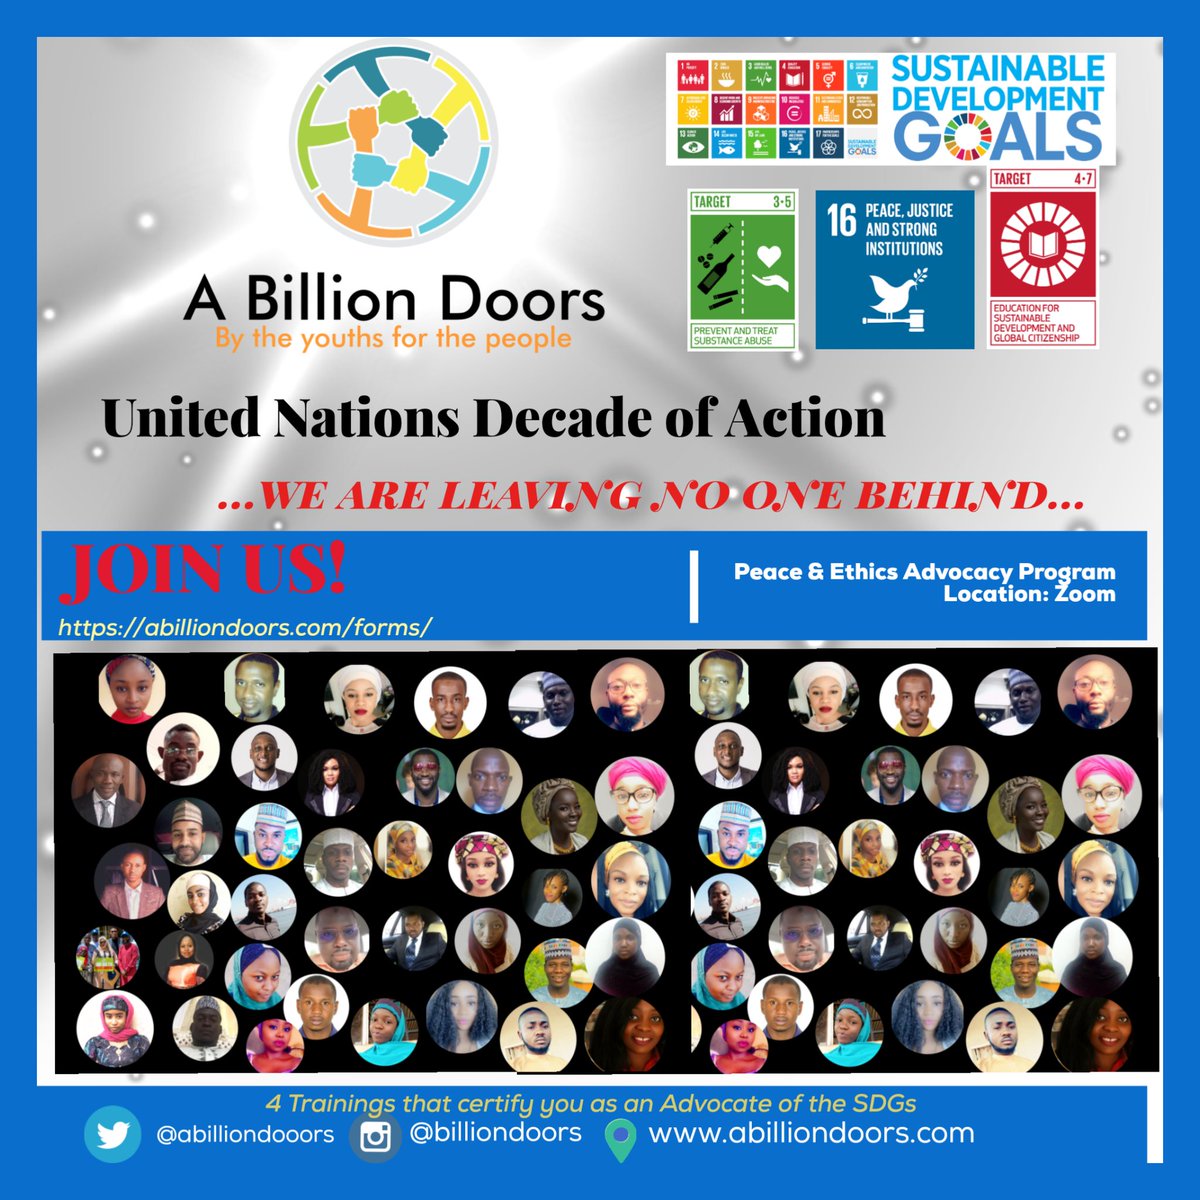 #SDGs #decadeofaction #leavingnoonebehind #YouthDemocraticParty #unitednations #BiggBossTelugu4 #TrumpConcede 
We are the Impact makers, change makers, the instruments for a peaceful coexistence..Rebuilding sustainable peace.